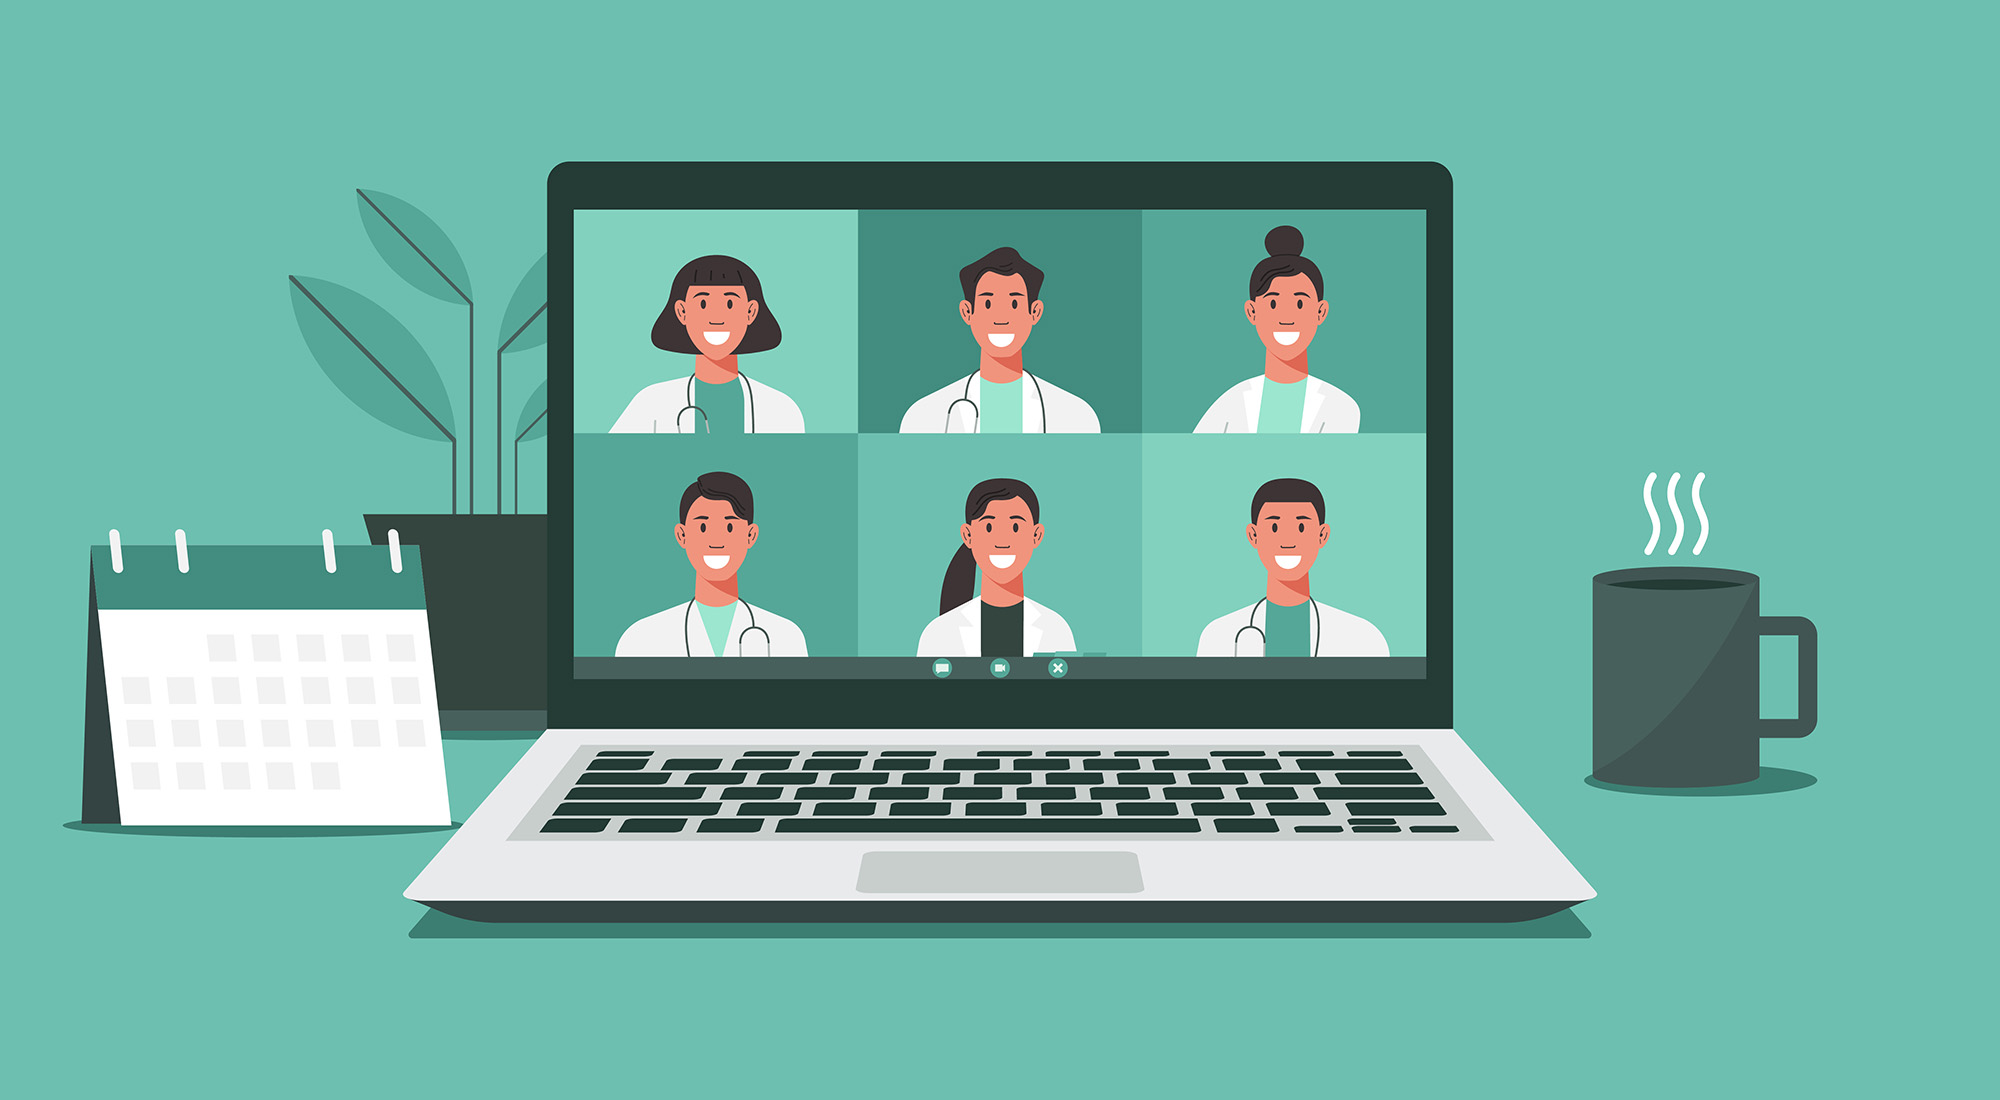 Illustration showing health care workers on a laptop computer screen as if in a virtual meeting.